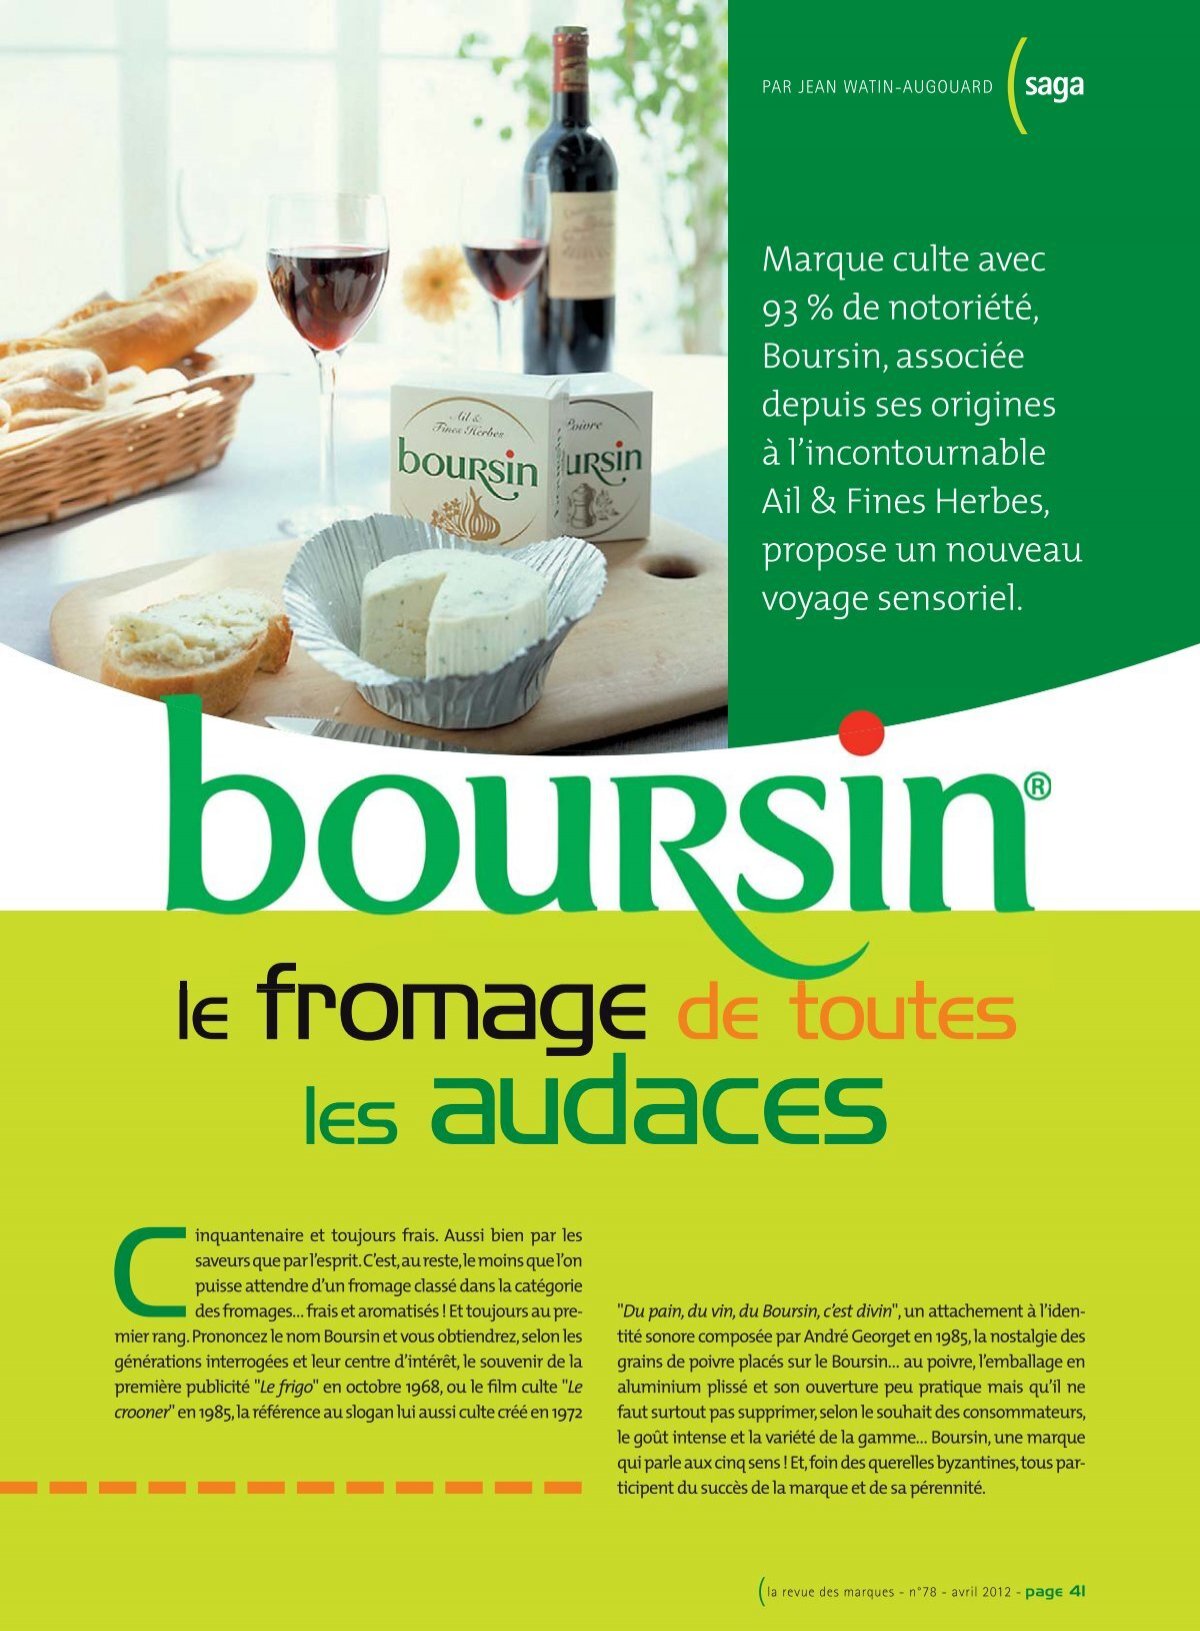 Fromage Boursin ail et fines herbes, Fromageries Bel Canada Inc.